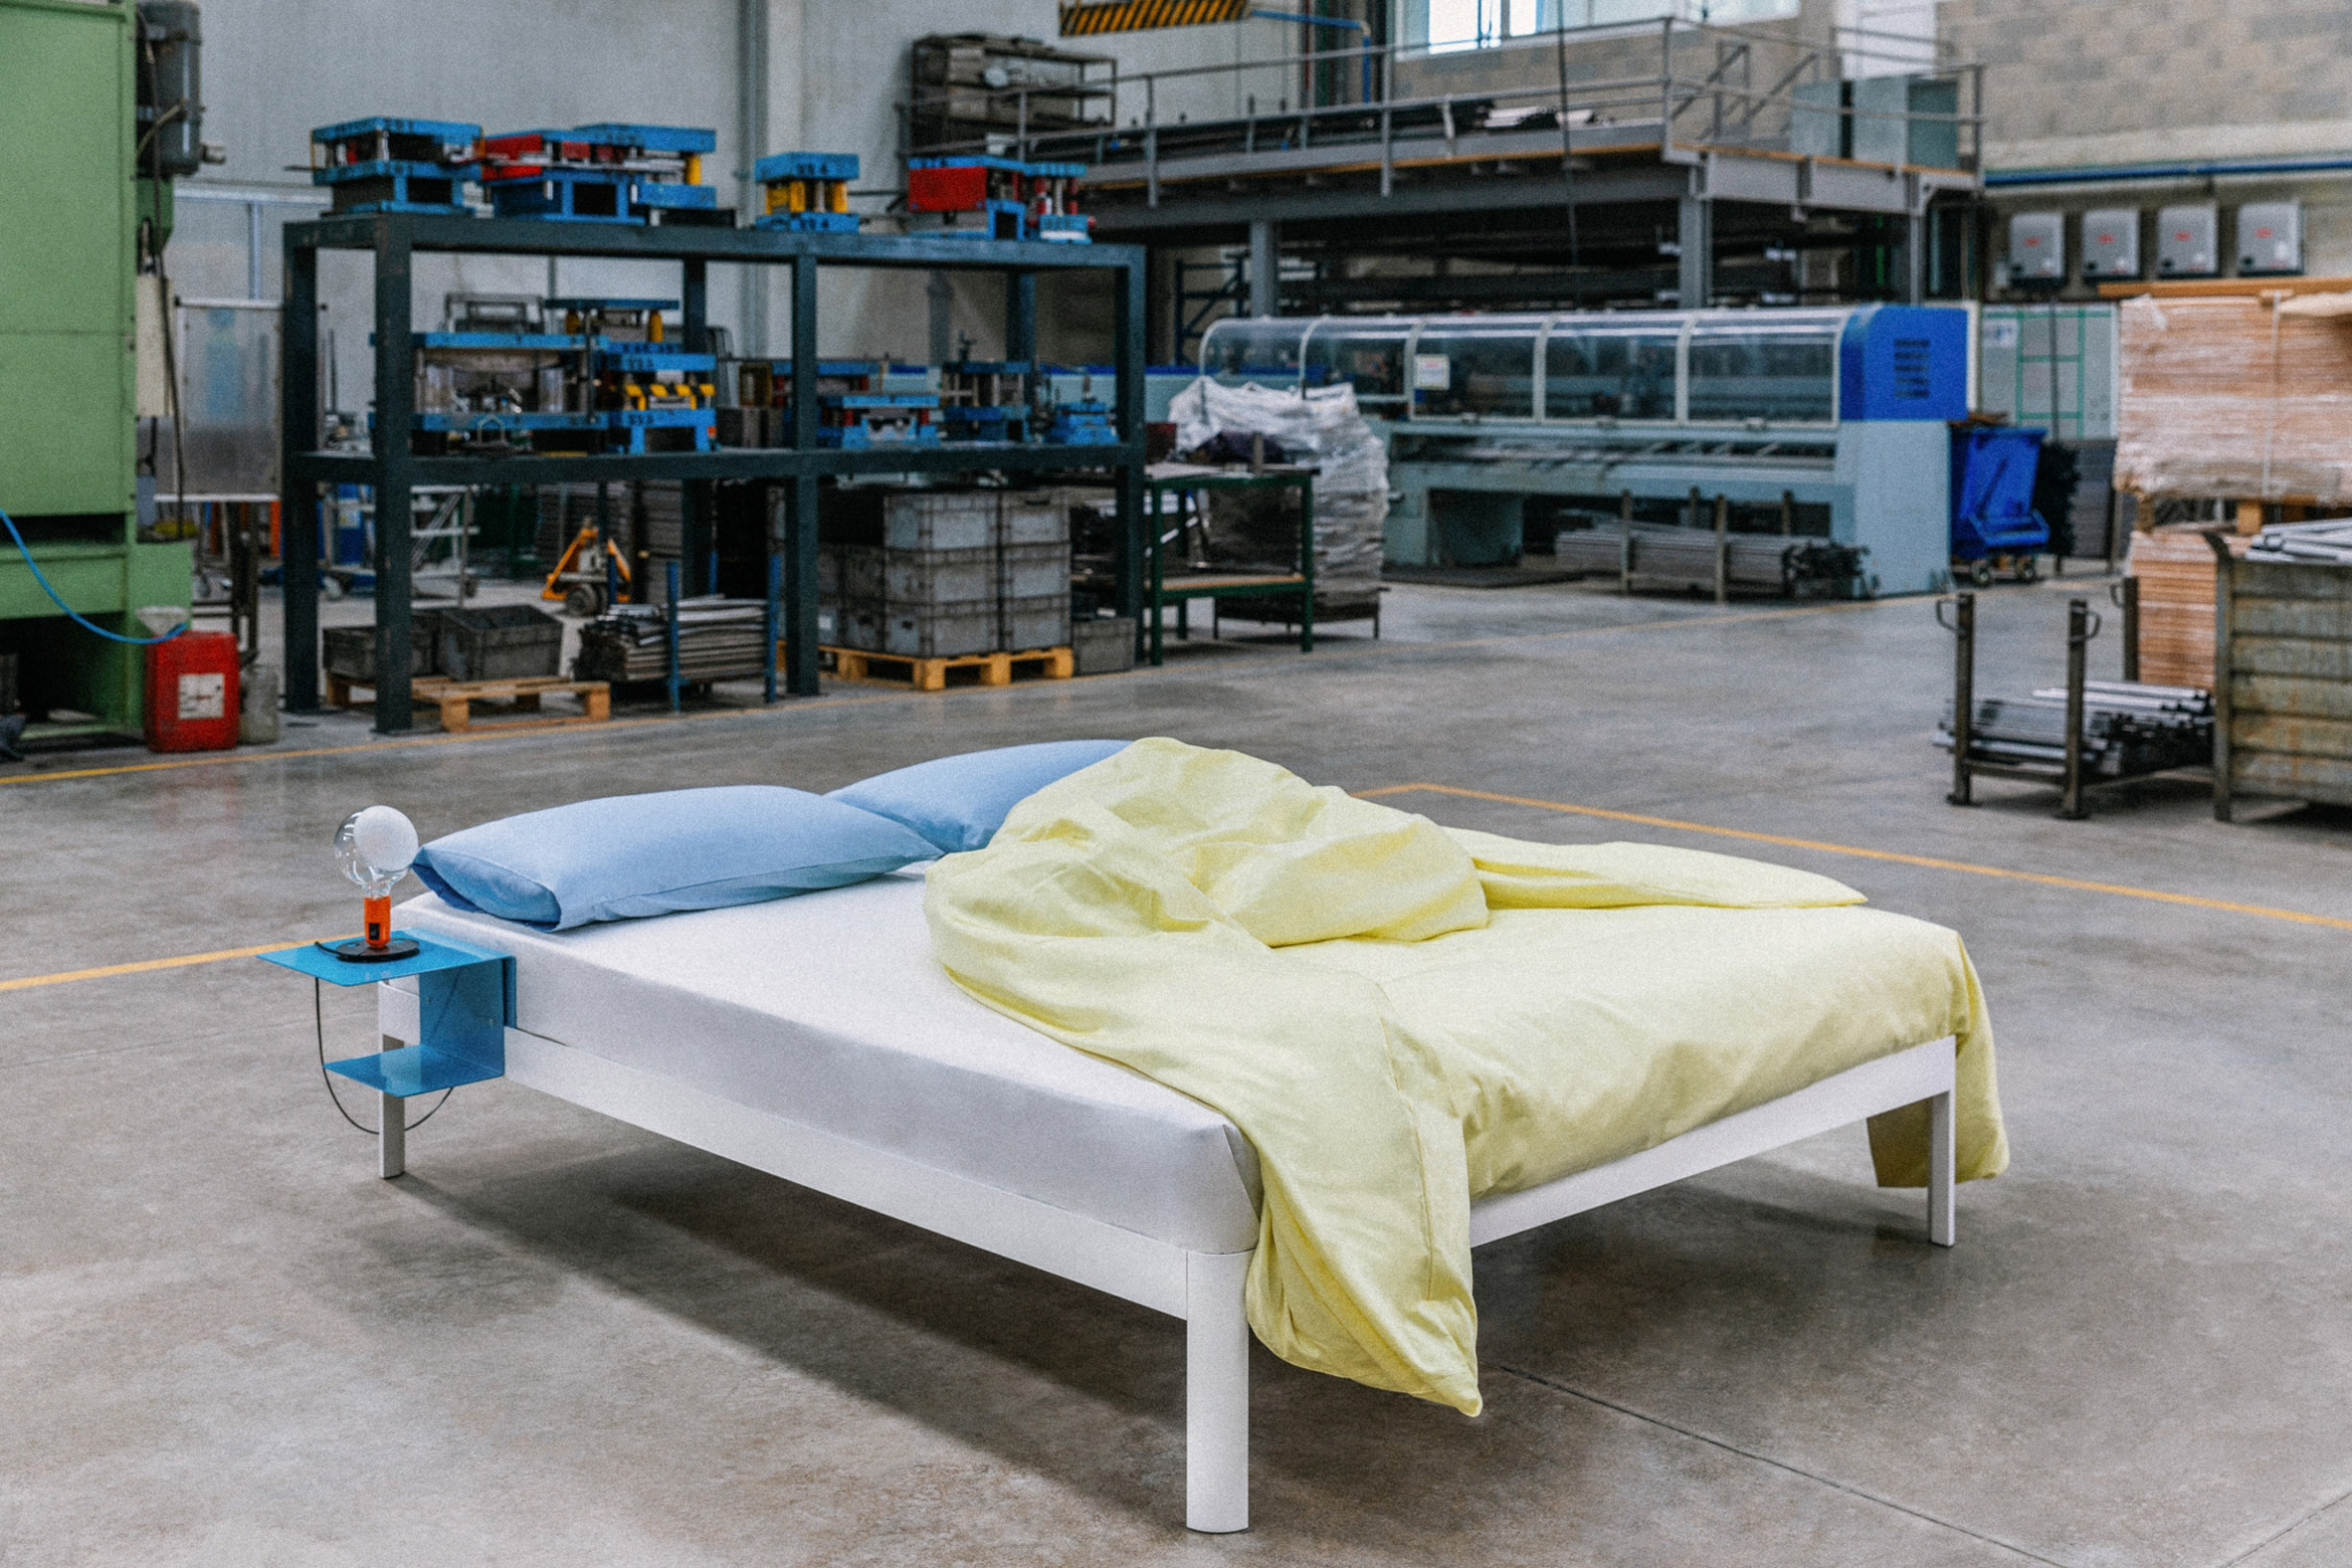 Photograph of a white bed with yellow and blue bed sheets in an industrial factory